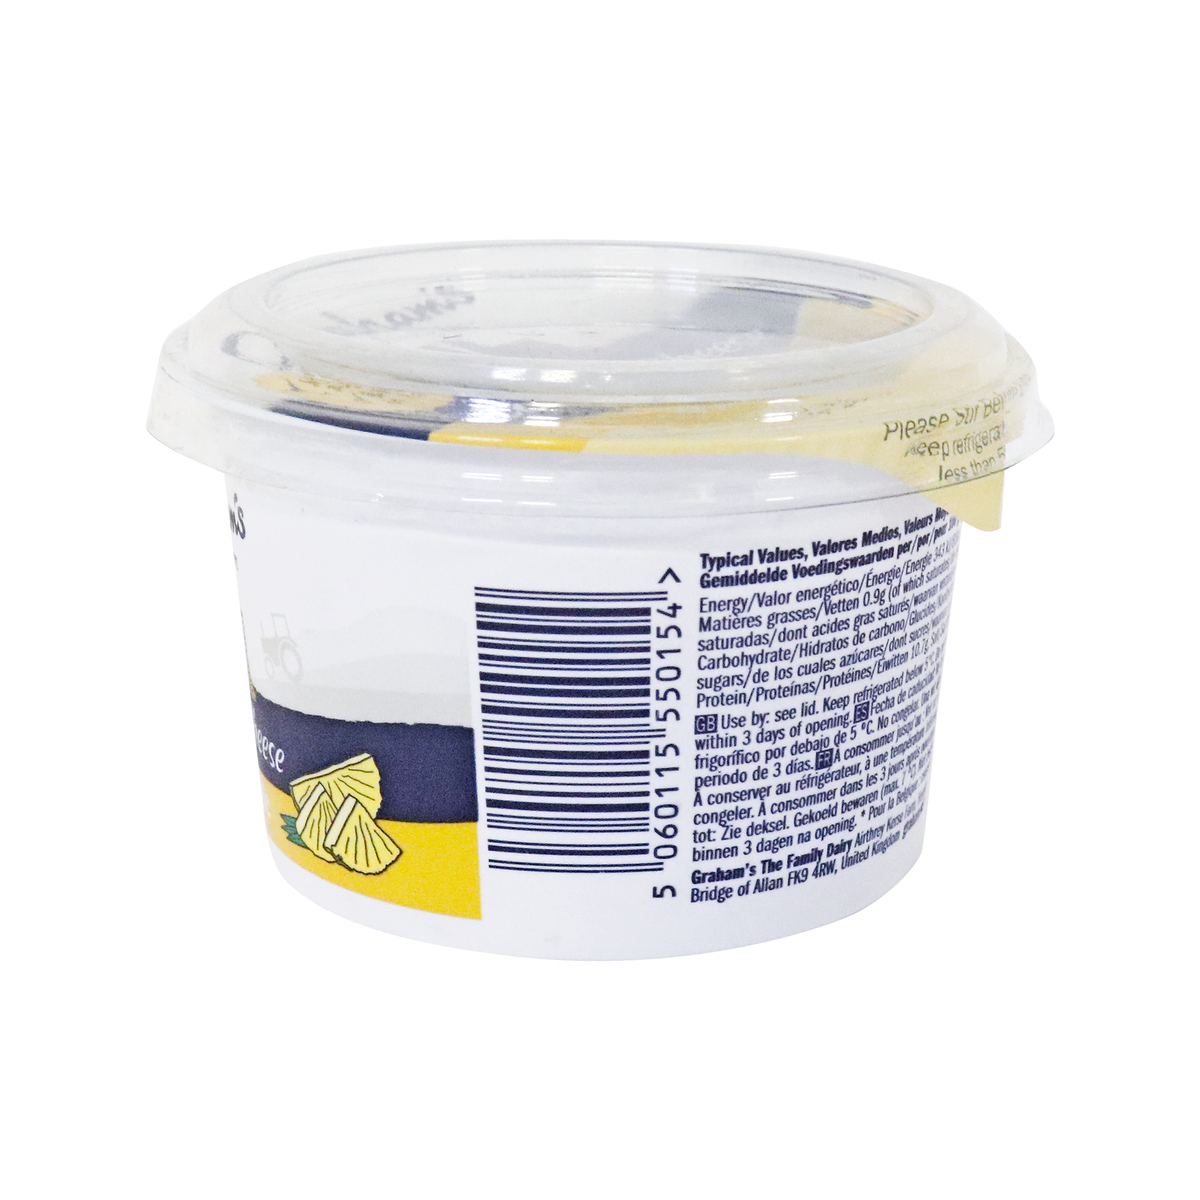 Buy Kingdom Cottage Cheese With Pineapple Low Fat 227g Online